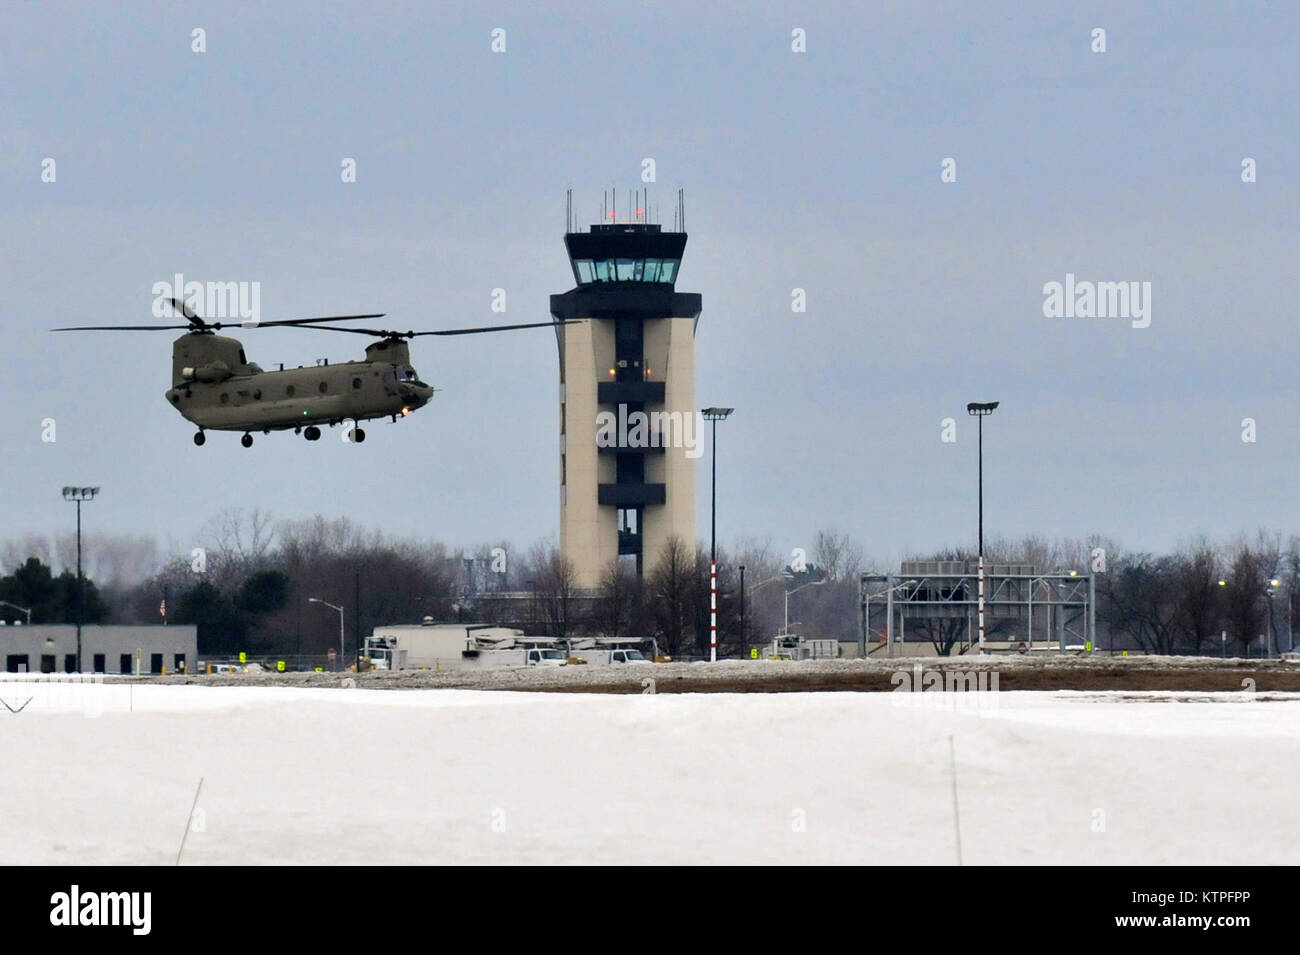 SYRACUSE, NY - Two CH-47 Chinook helicopters from Company B, 3rd Battalion, 126th Aviation located in Rochester, New York land at Hancock Field Air National Guard Base on March 14, 2015. 30 Airmen from the 274th Air Support Operations Squadron (ASOS), based at Hancock Field and the aircrew of two CH-47F Chinook helicopters from Company B, 3rd Battalion, 126th Aviation based at the Army Aviation Support Facility at Rochester International Airport trained together for the first time. The training included Joint Terminal Attack Controller (or JTAC) Airmen from the 274th ASOS conducting CH-47 heli Stock Photo